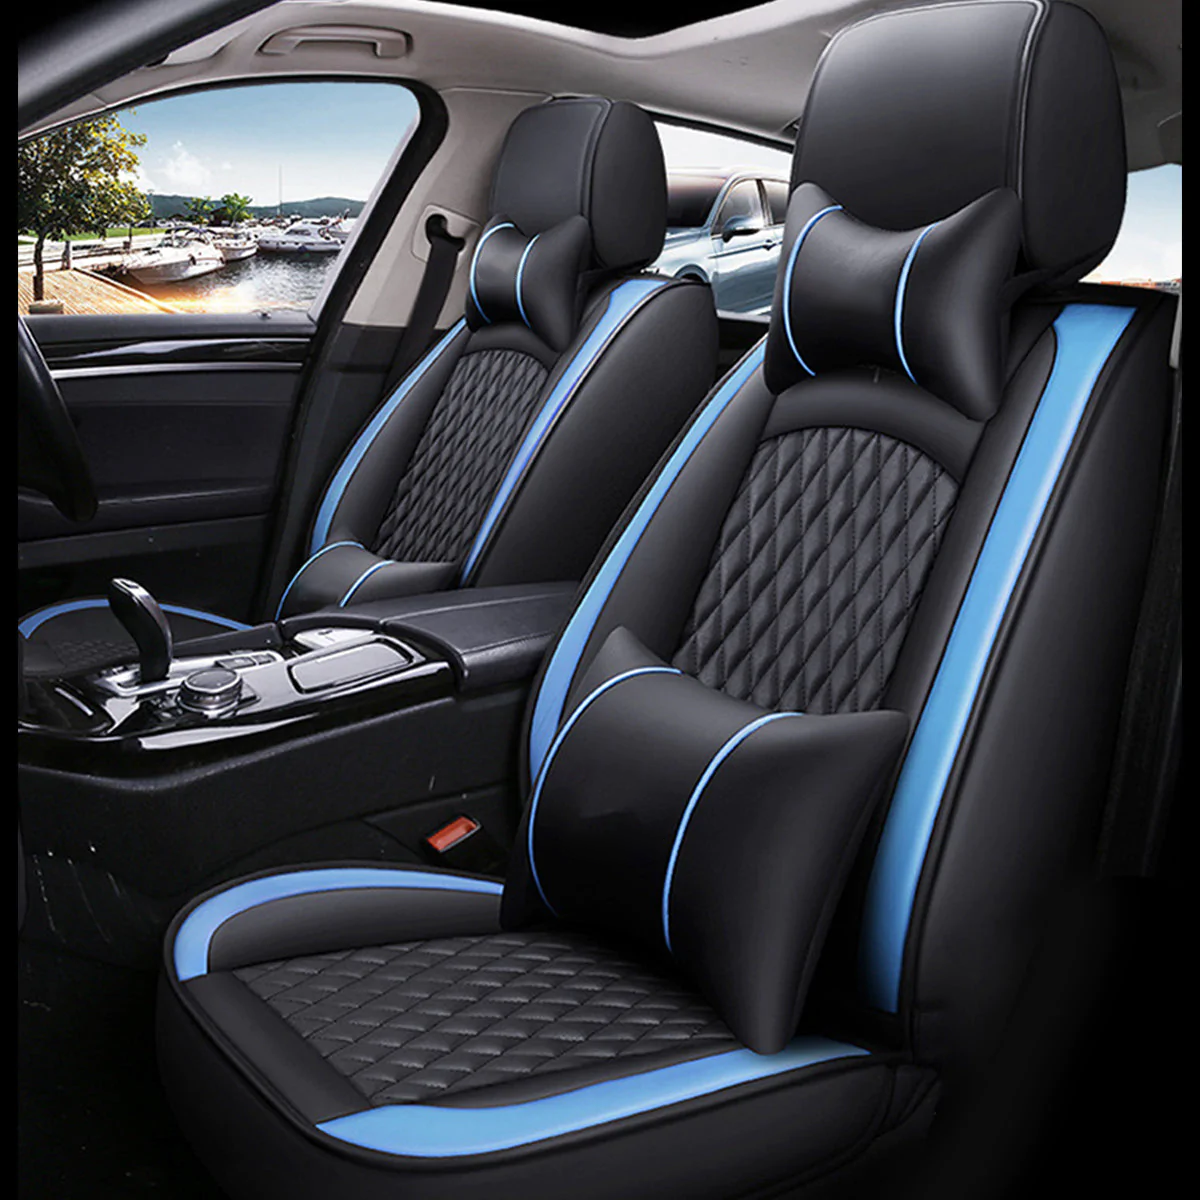 Custom Text For Seat Covers 5 Seats Full Set, Custom Fit For Your Cars, Leatherette Automotive Seat Cushion Protector Universal Fit, Vehicle Auto Interior Decor DR13988